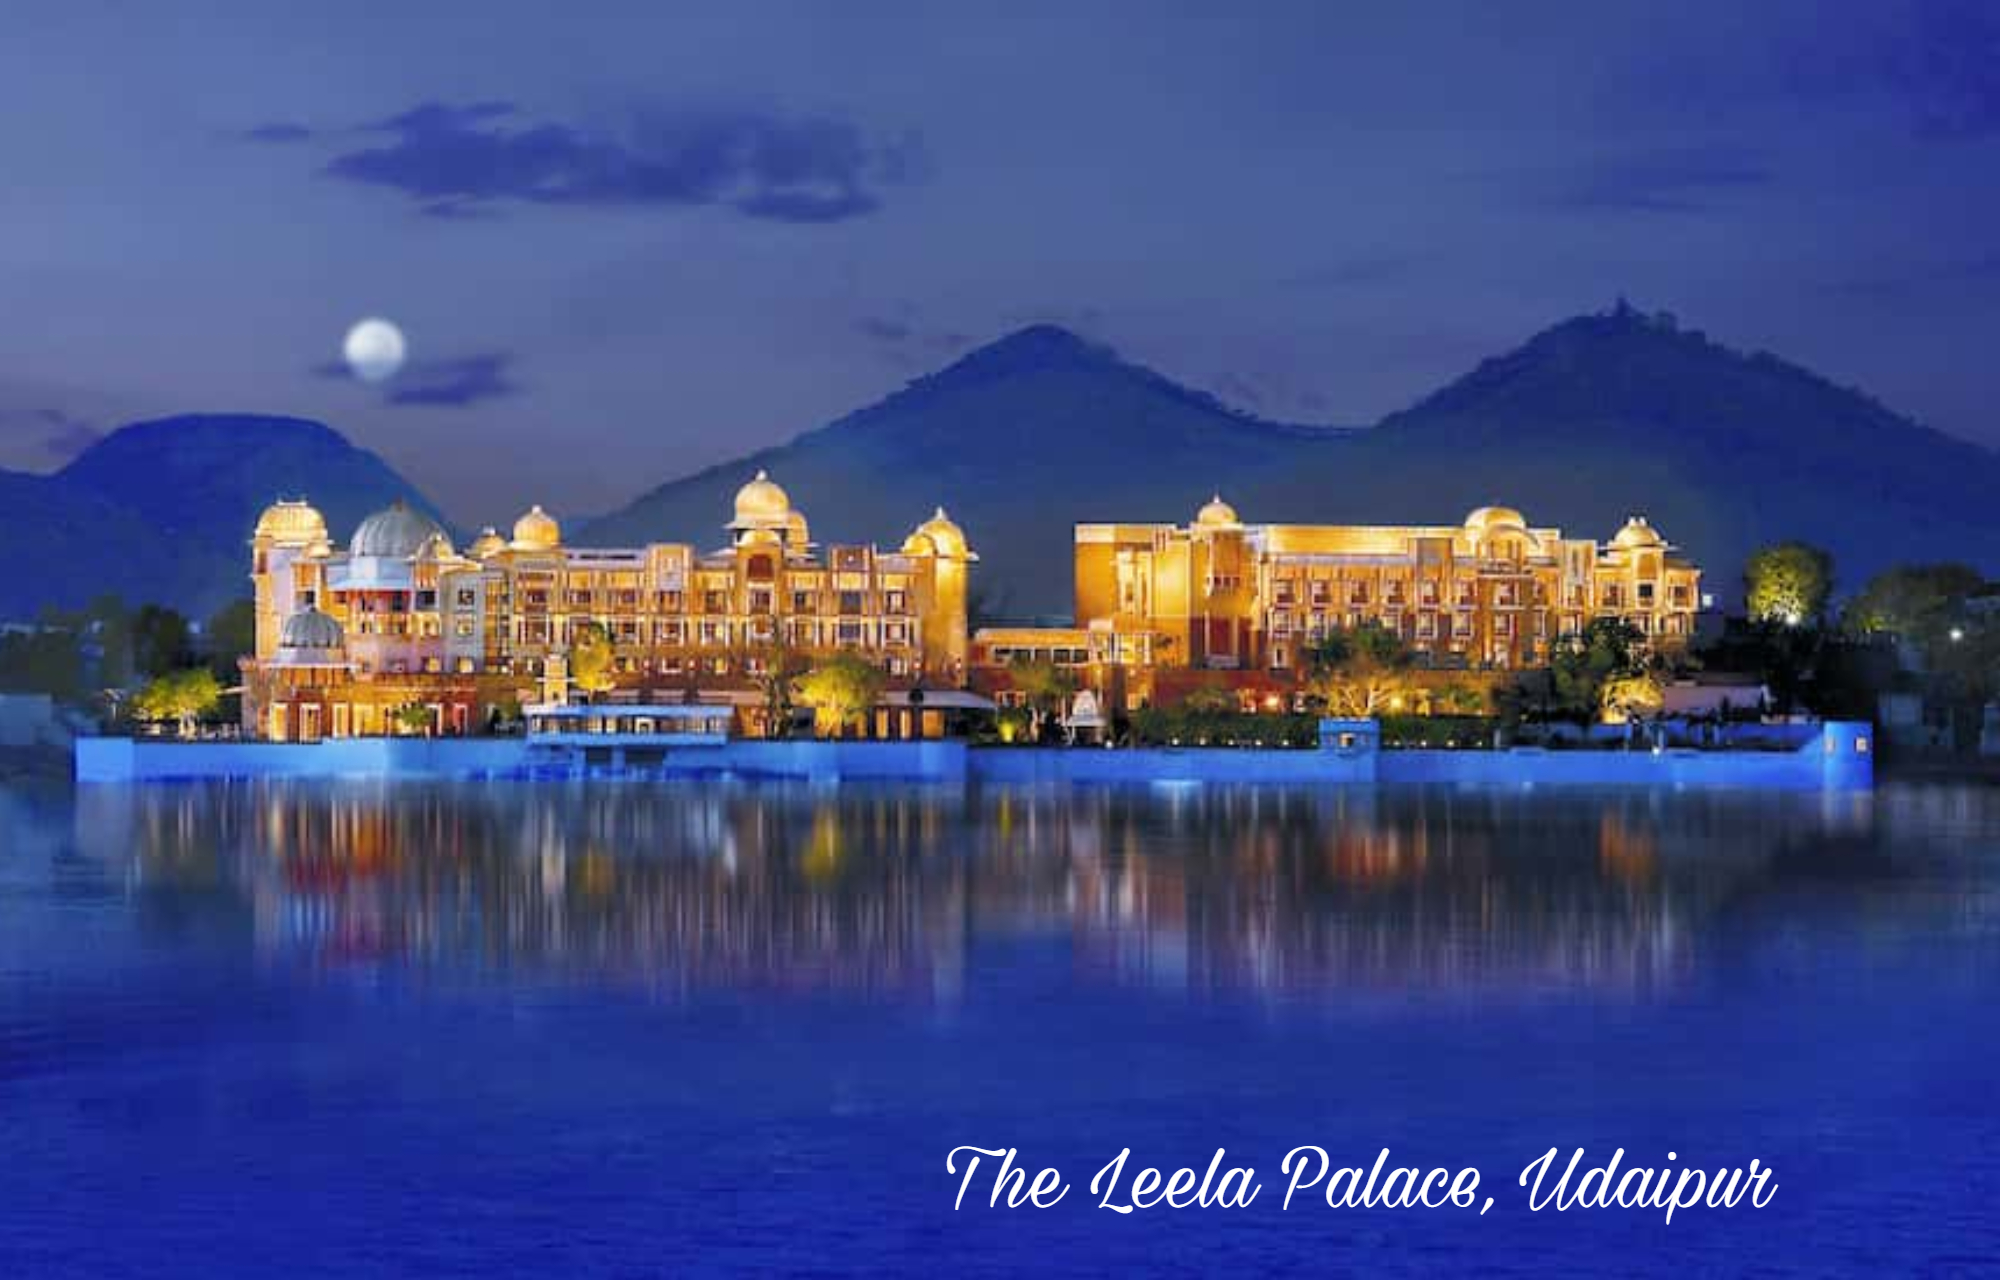 the leela palace udaipur, best 10 luxury hotels in rajasthan, top 10 luxury hotels in rajasthan, rajasthan best hotels,